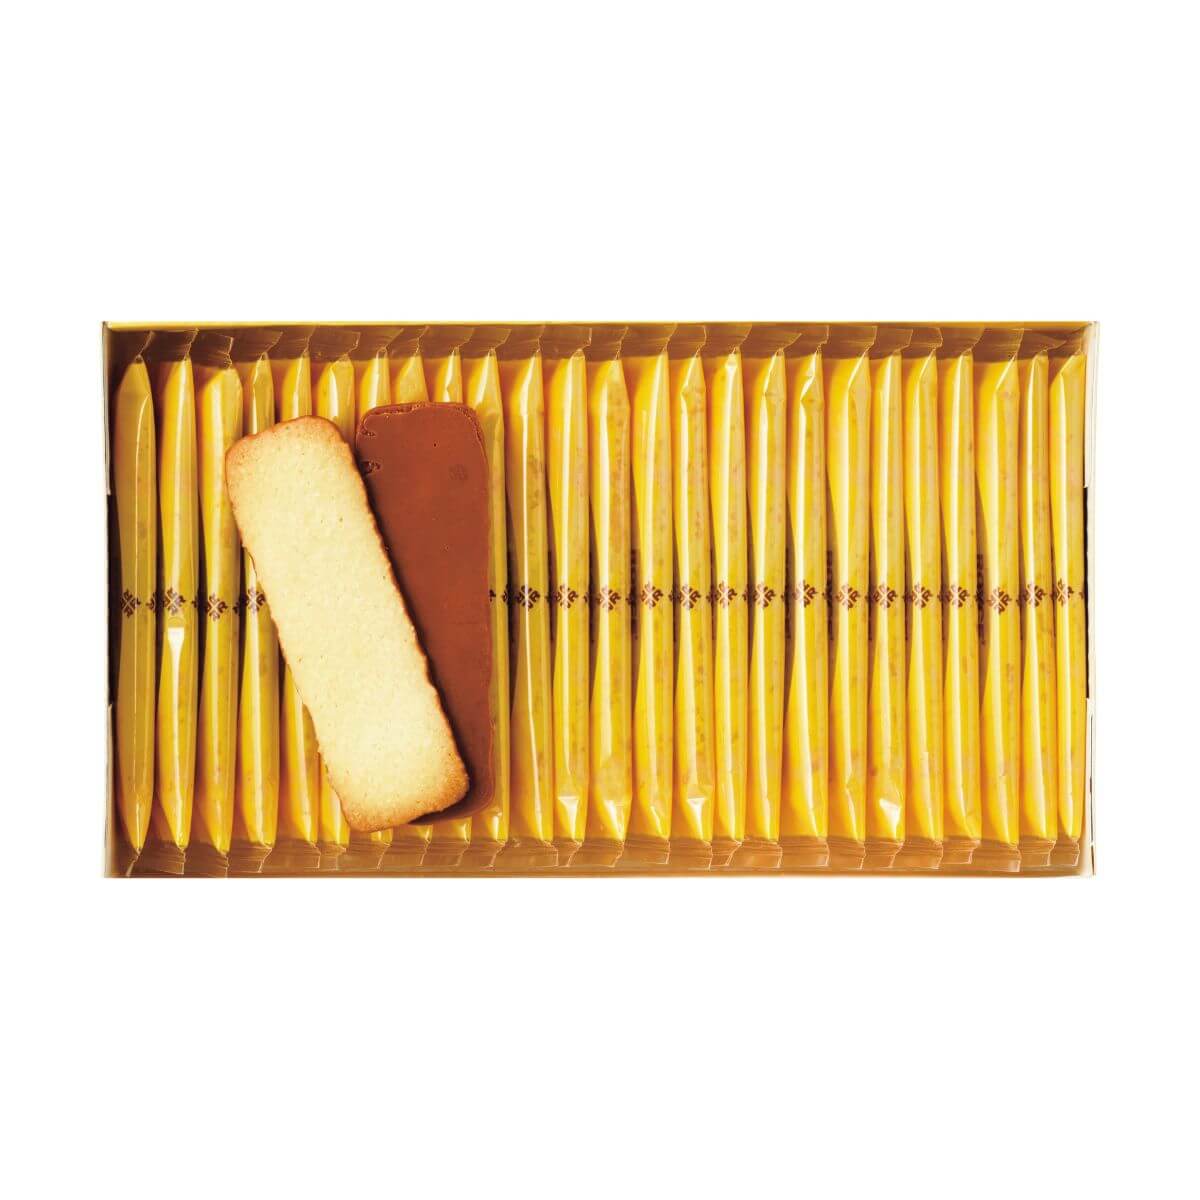 ROYCE' Chocolate - Baton Cookies "Coconut" - Image shows yellow box filled with individually-wrapped cookies with yellow wrapper.